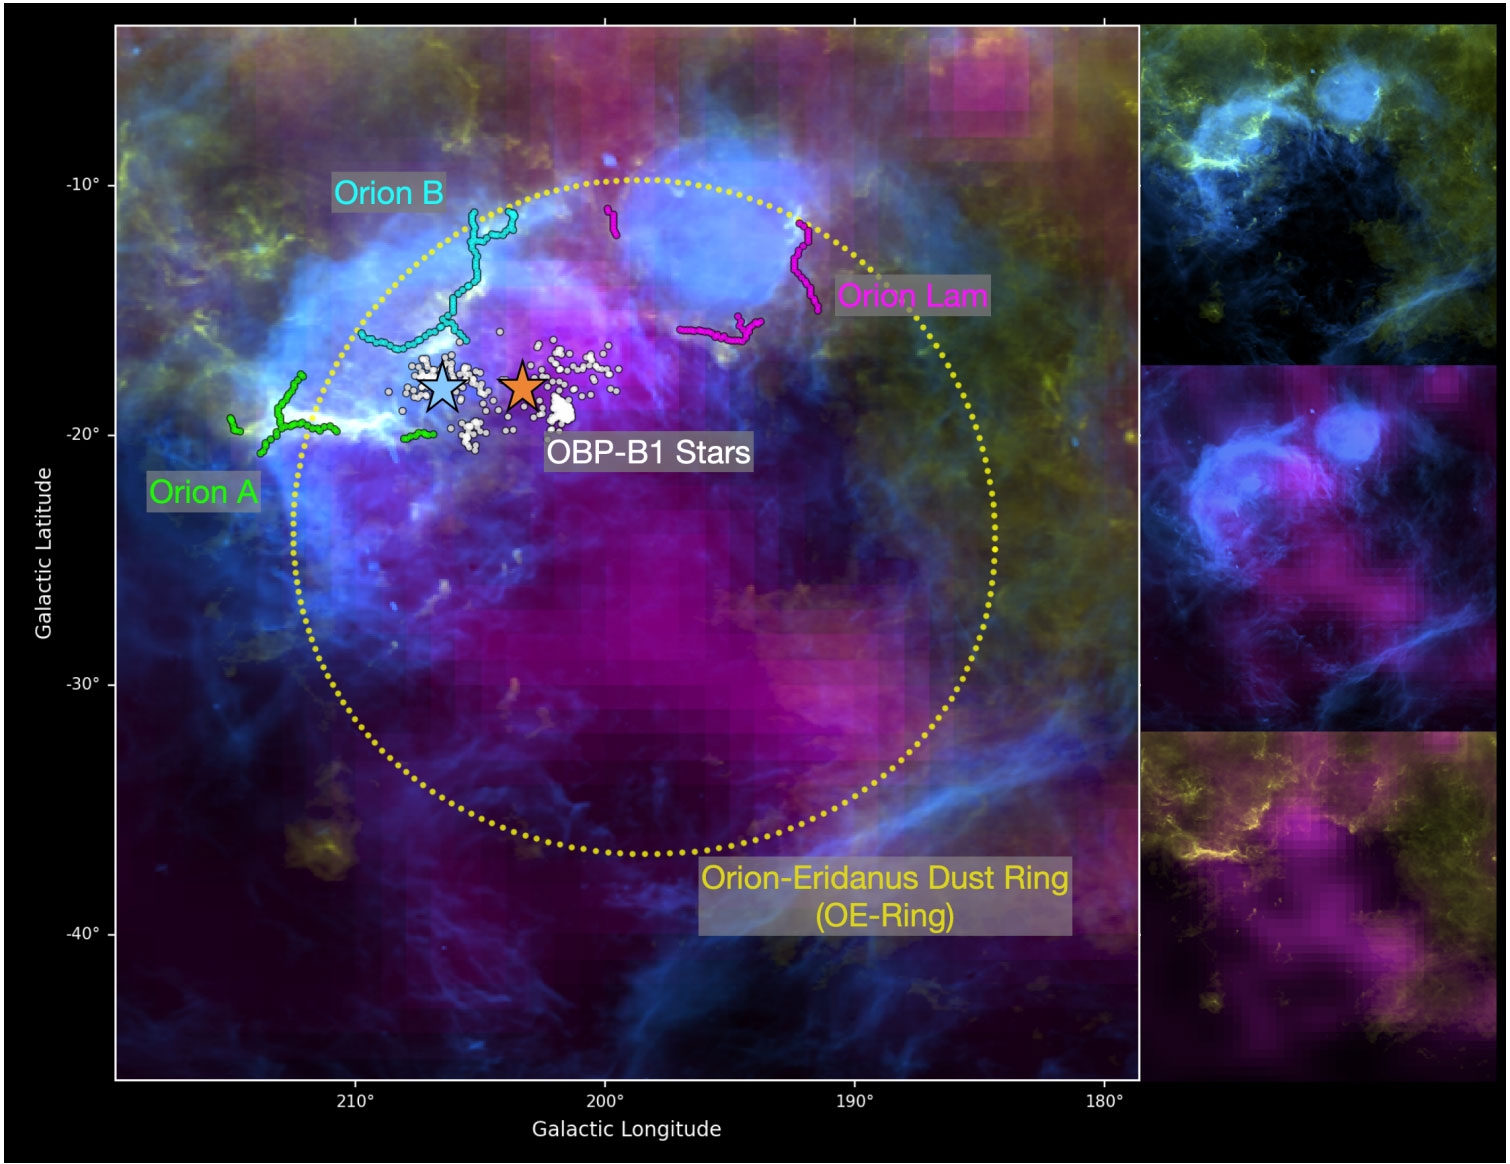 This image shows a 2D view of the Orion complex in different wavelengths of light. Blue corresponds to hot gas, yellow indicates dust, and purple serves as a tracer of recent supernova explosions. The purple arc indicates the rough boundaries of the region containing supernova material that relates to the other structures. The blue star shows the center of a large arc of hot gas, known as Barnard’s Loop (outlined in blue).  A large ring of dust that appears in both 2D and 3D data is shown by the yellow circle. Three major clouds of star-forming gas – Orion A (green), Orion B (cyan), and Orion Lam (purple) – are indicated by the colored lines. Superimposed on the image is a cluster of stars that likely produced supernovae in the last 4 million years (shown in white). This cluster is coherently expanding outwards from a single point, which is shown by the orange star.